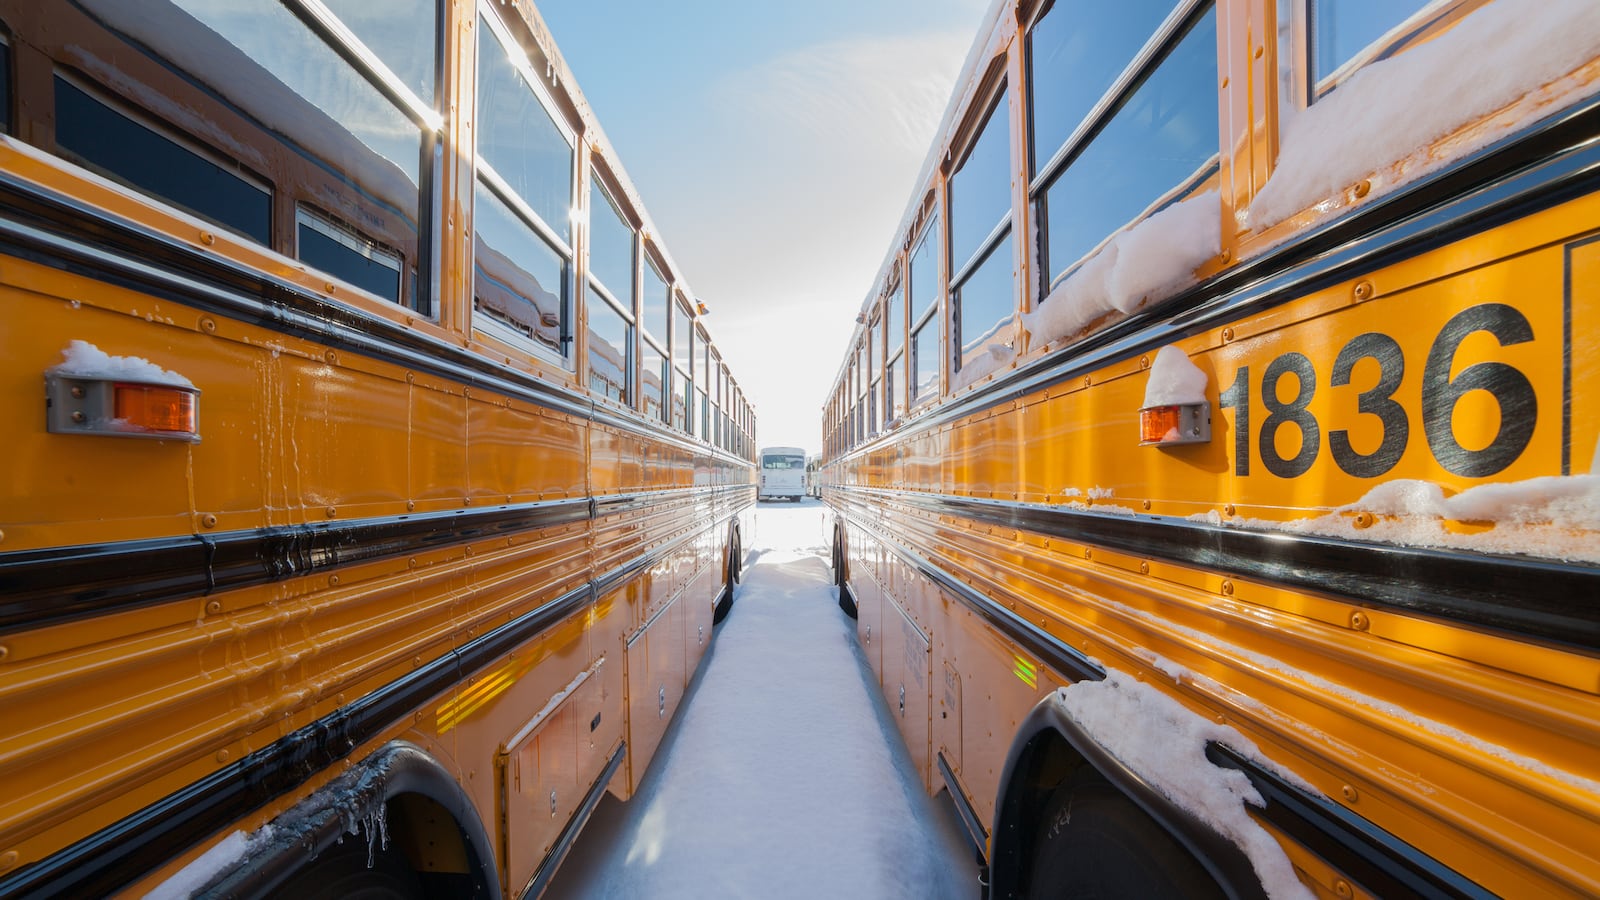 School buses in a school bus yard in winter with snow.